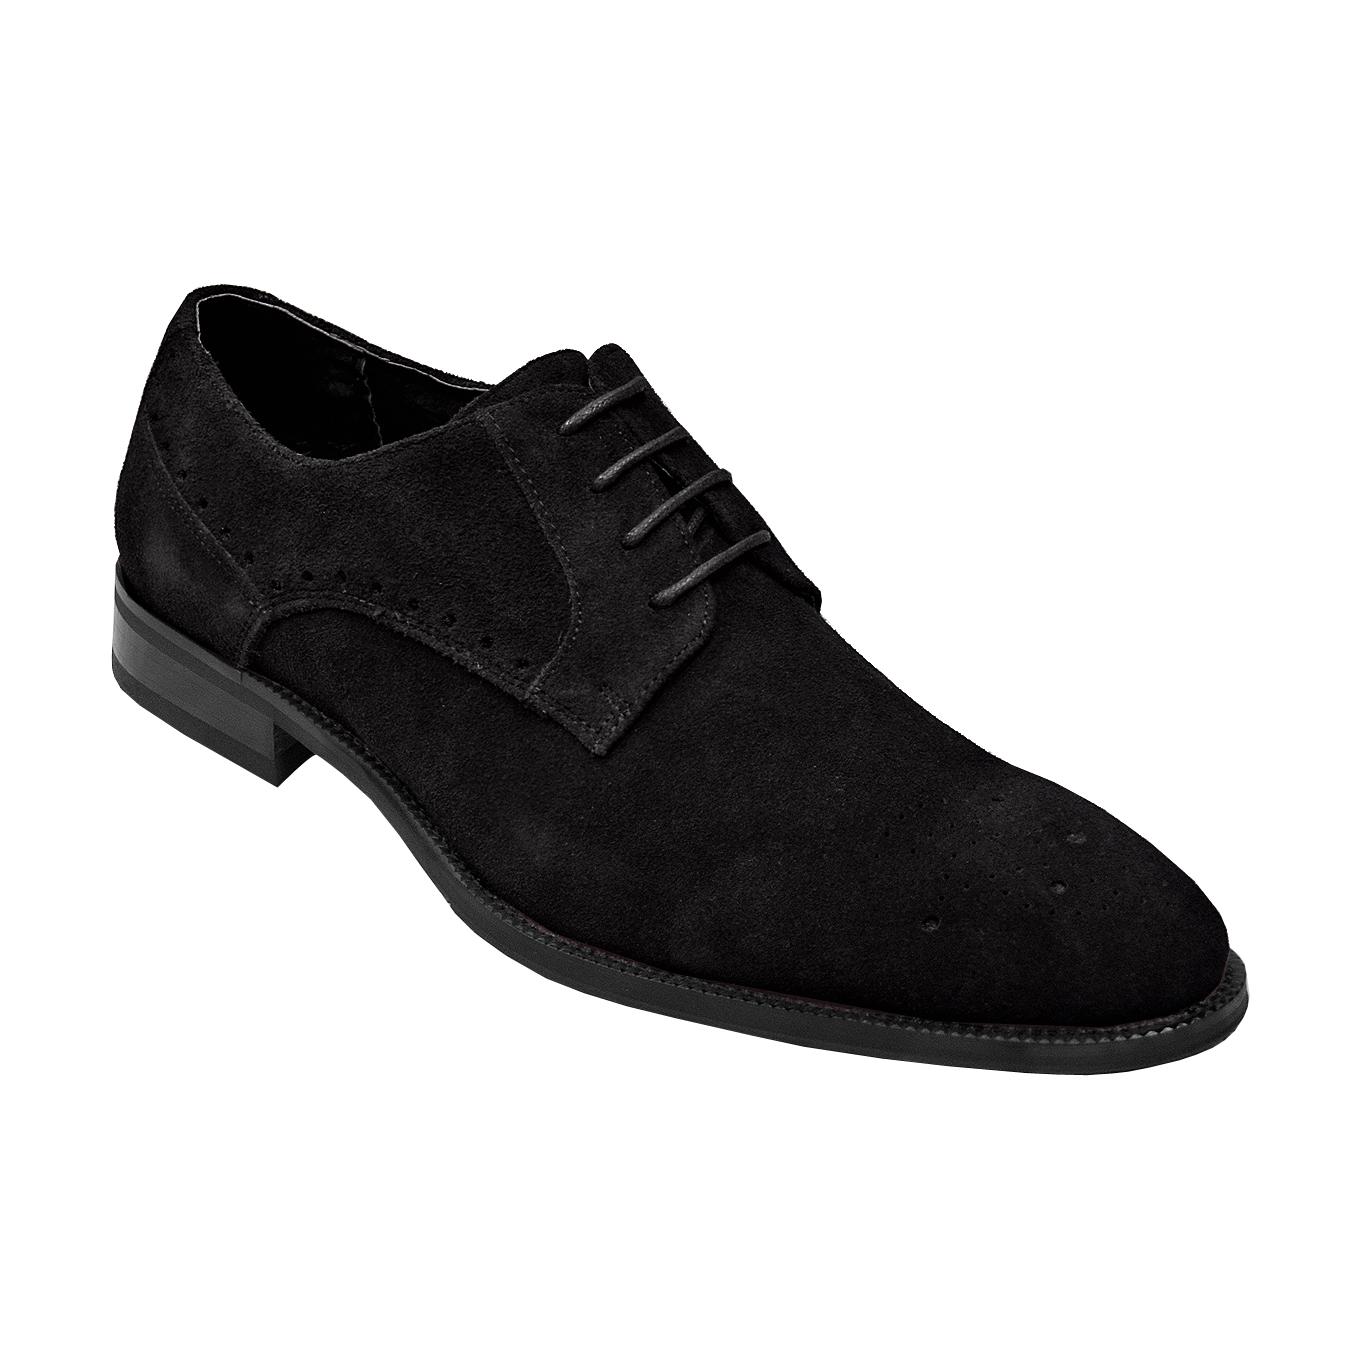 Stacy Adams Kensington Black Genuine Leather Suede With Perforated Toe ...